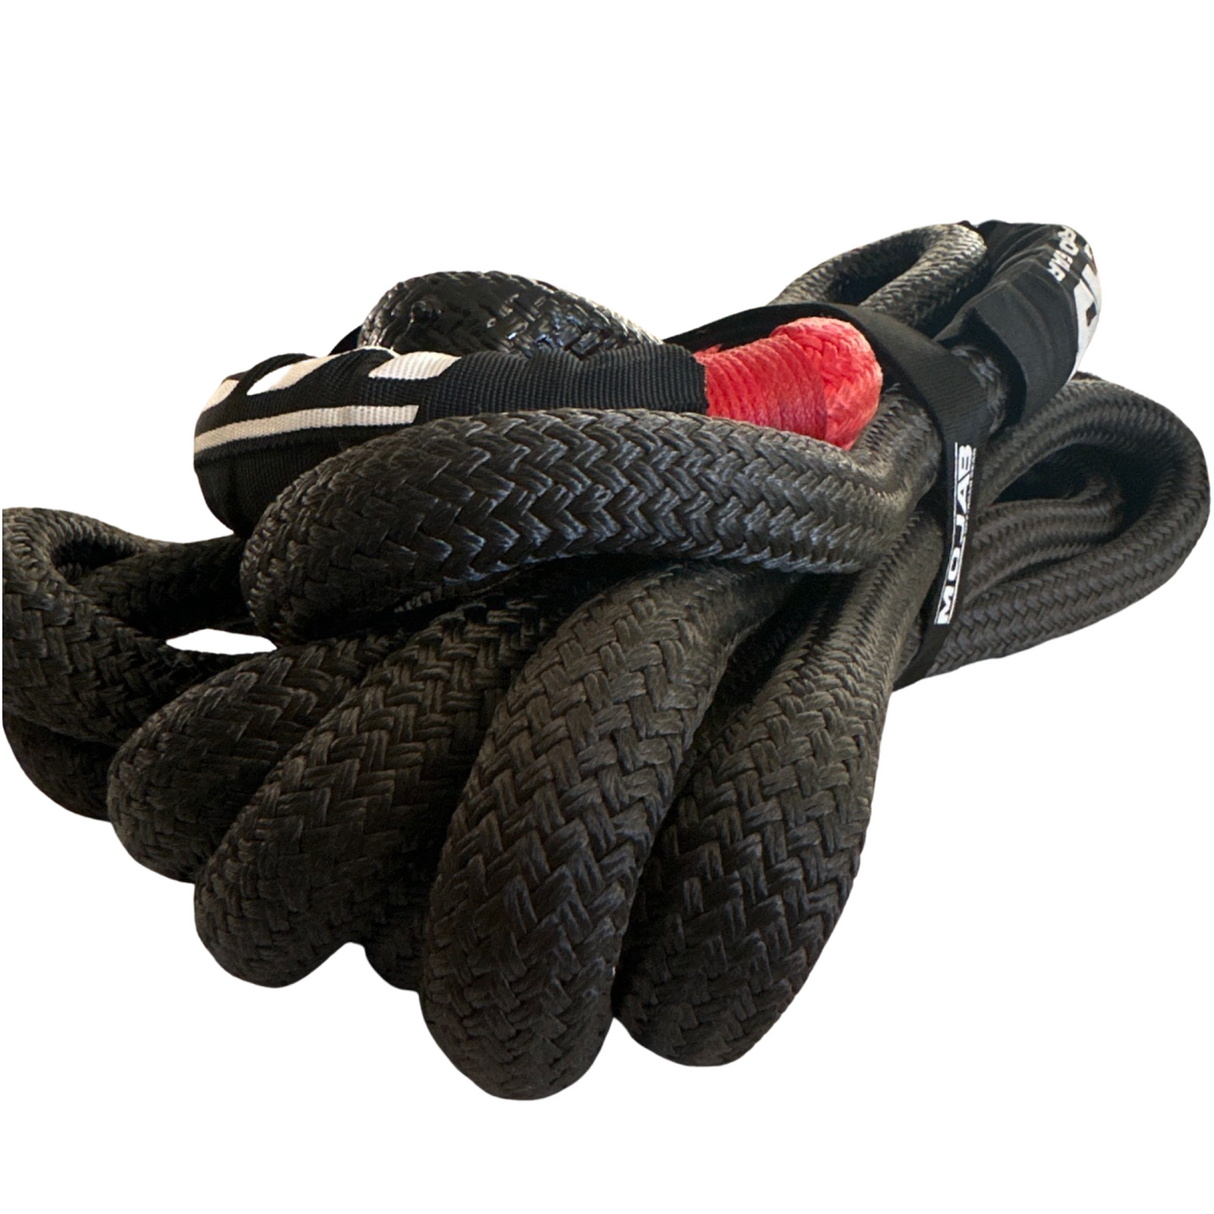 7/8'' x 30' Kinetic rope with storage bag.